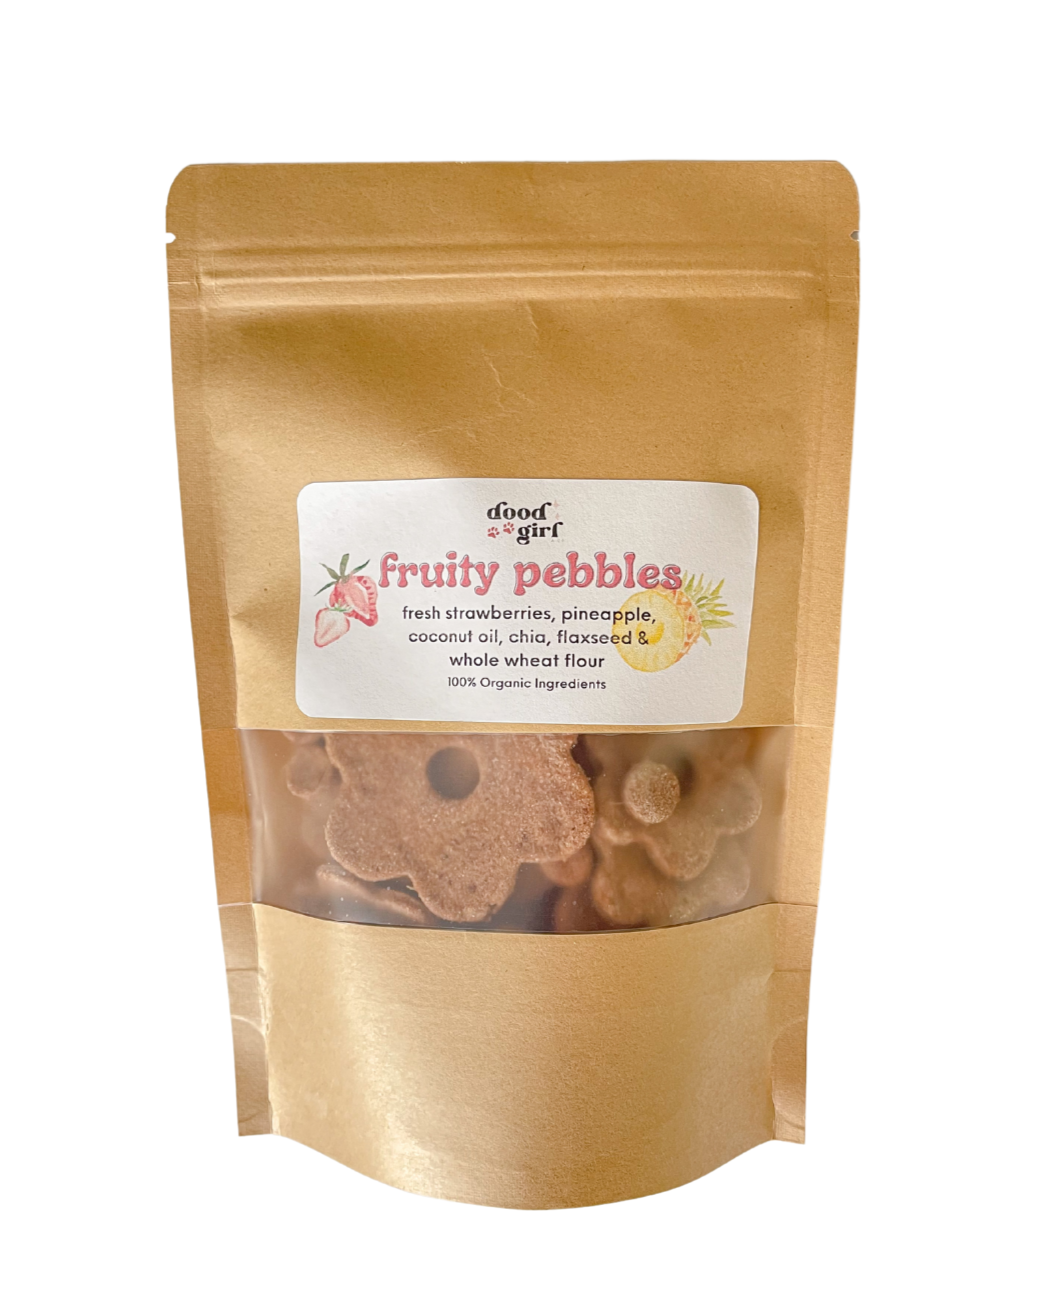 'Fruity Pebbles' Organic Dog Treats made with fresh strawberries and pineapple, giving your pup a mini-vacation in their mouth one treat at a time!